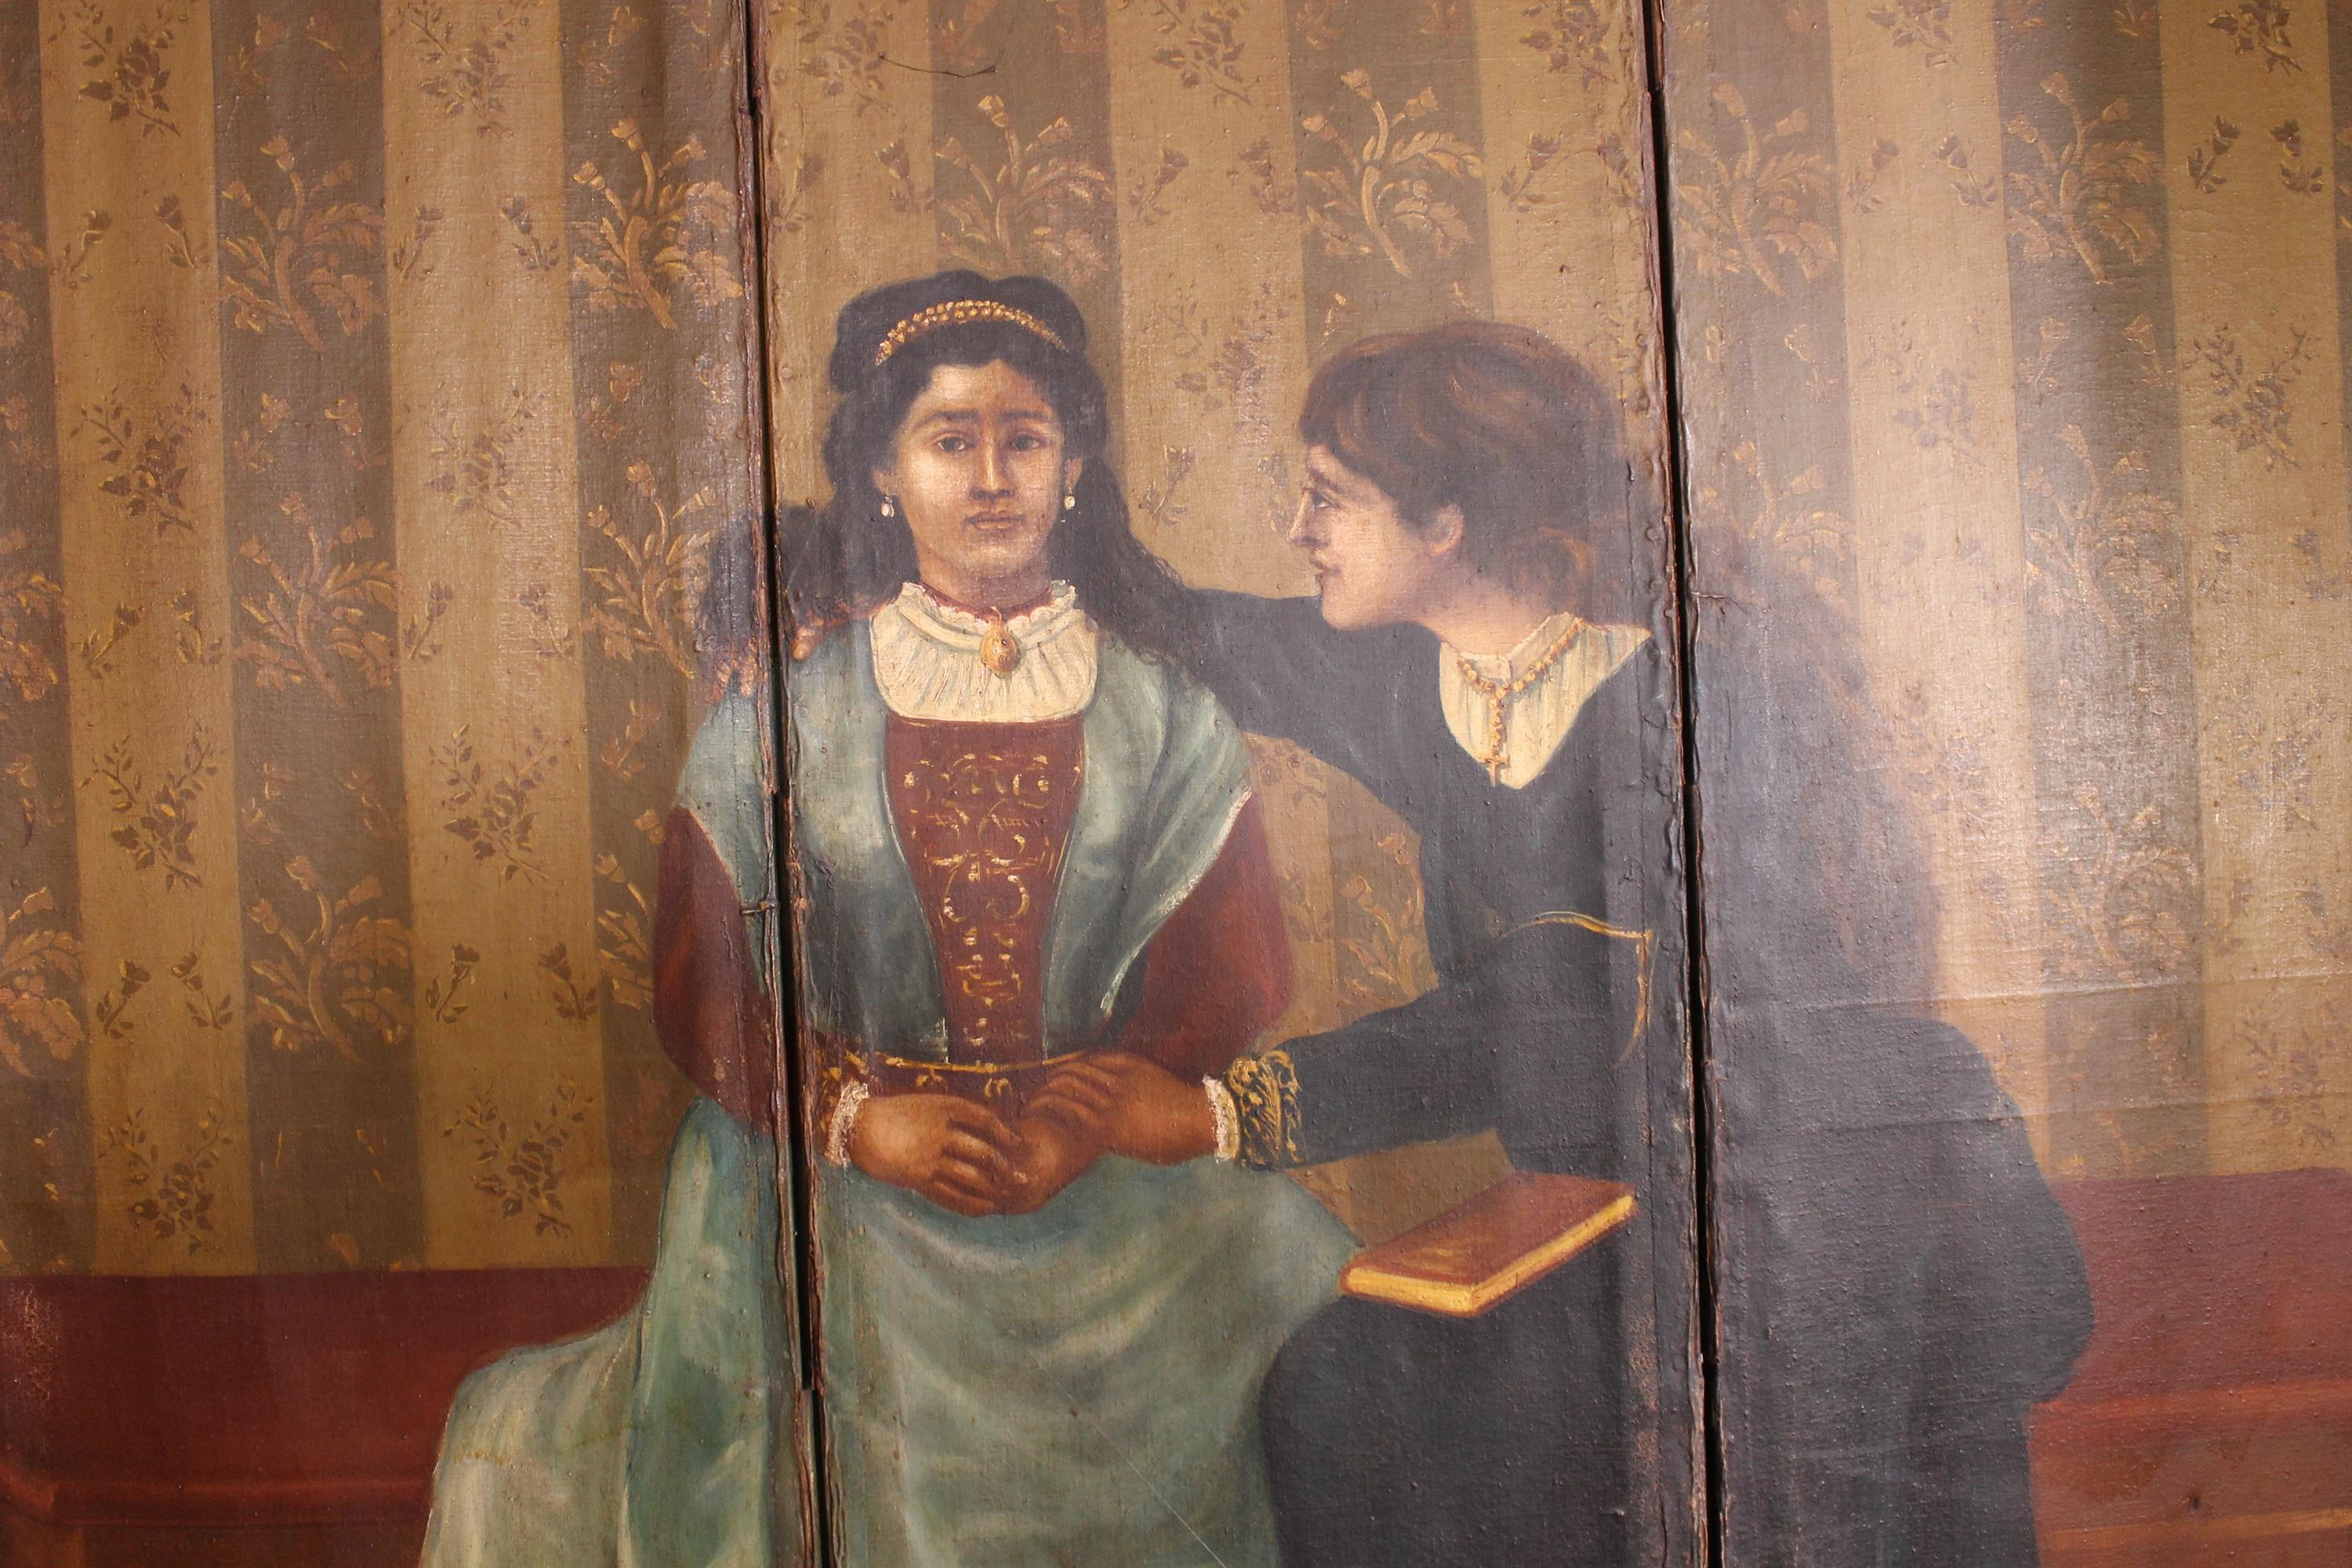 Double Side Folding Screen 18th Century Painting, 7 Fold 4